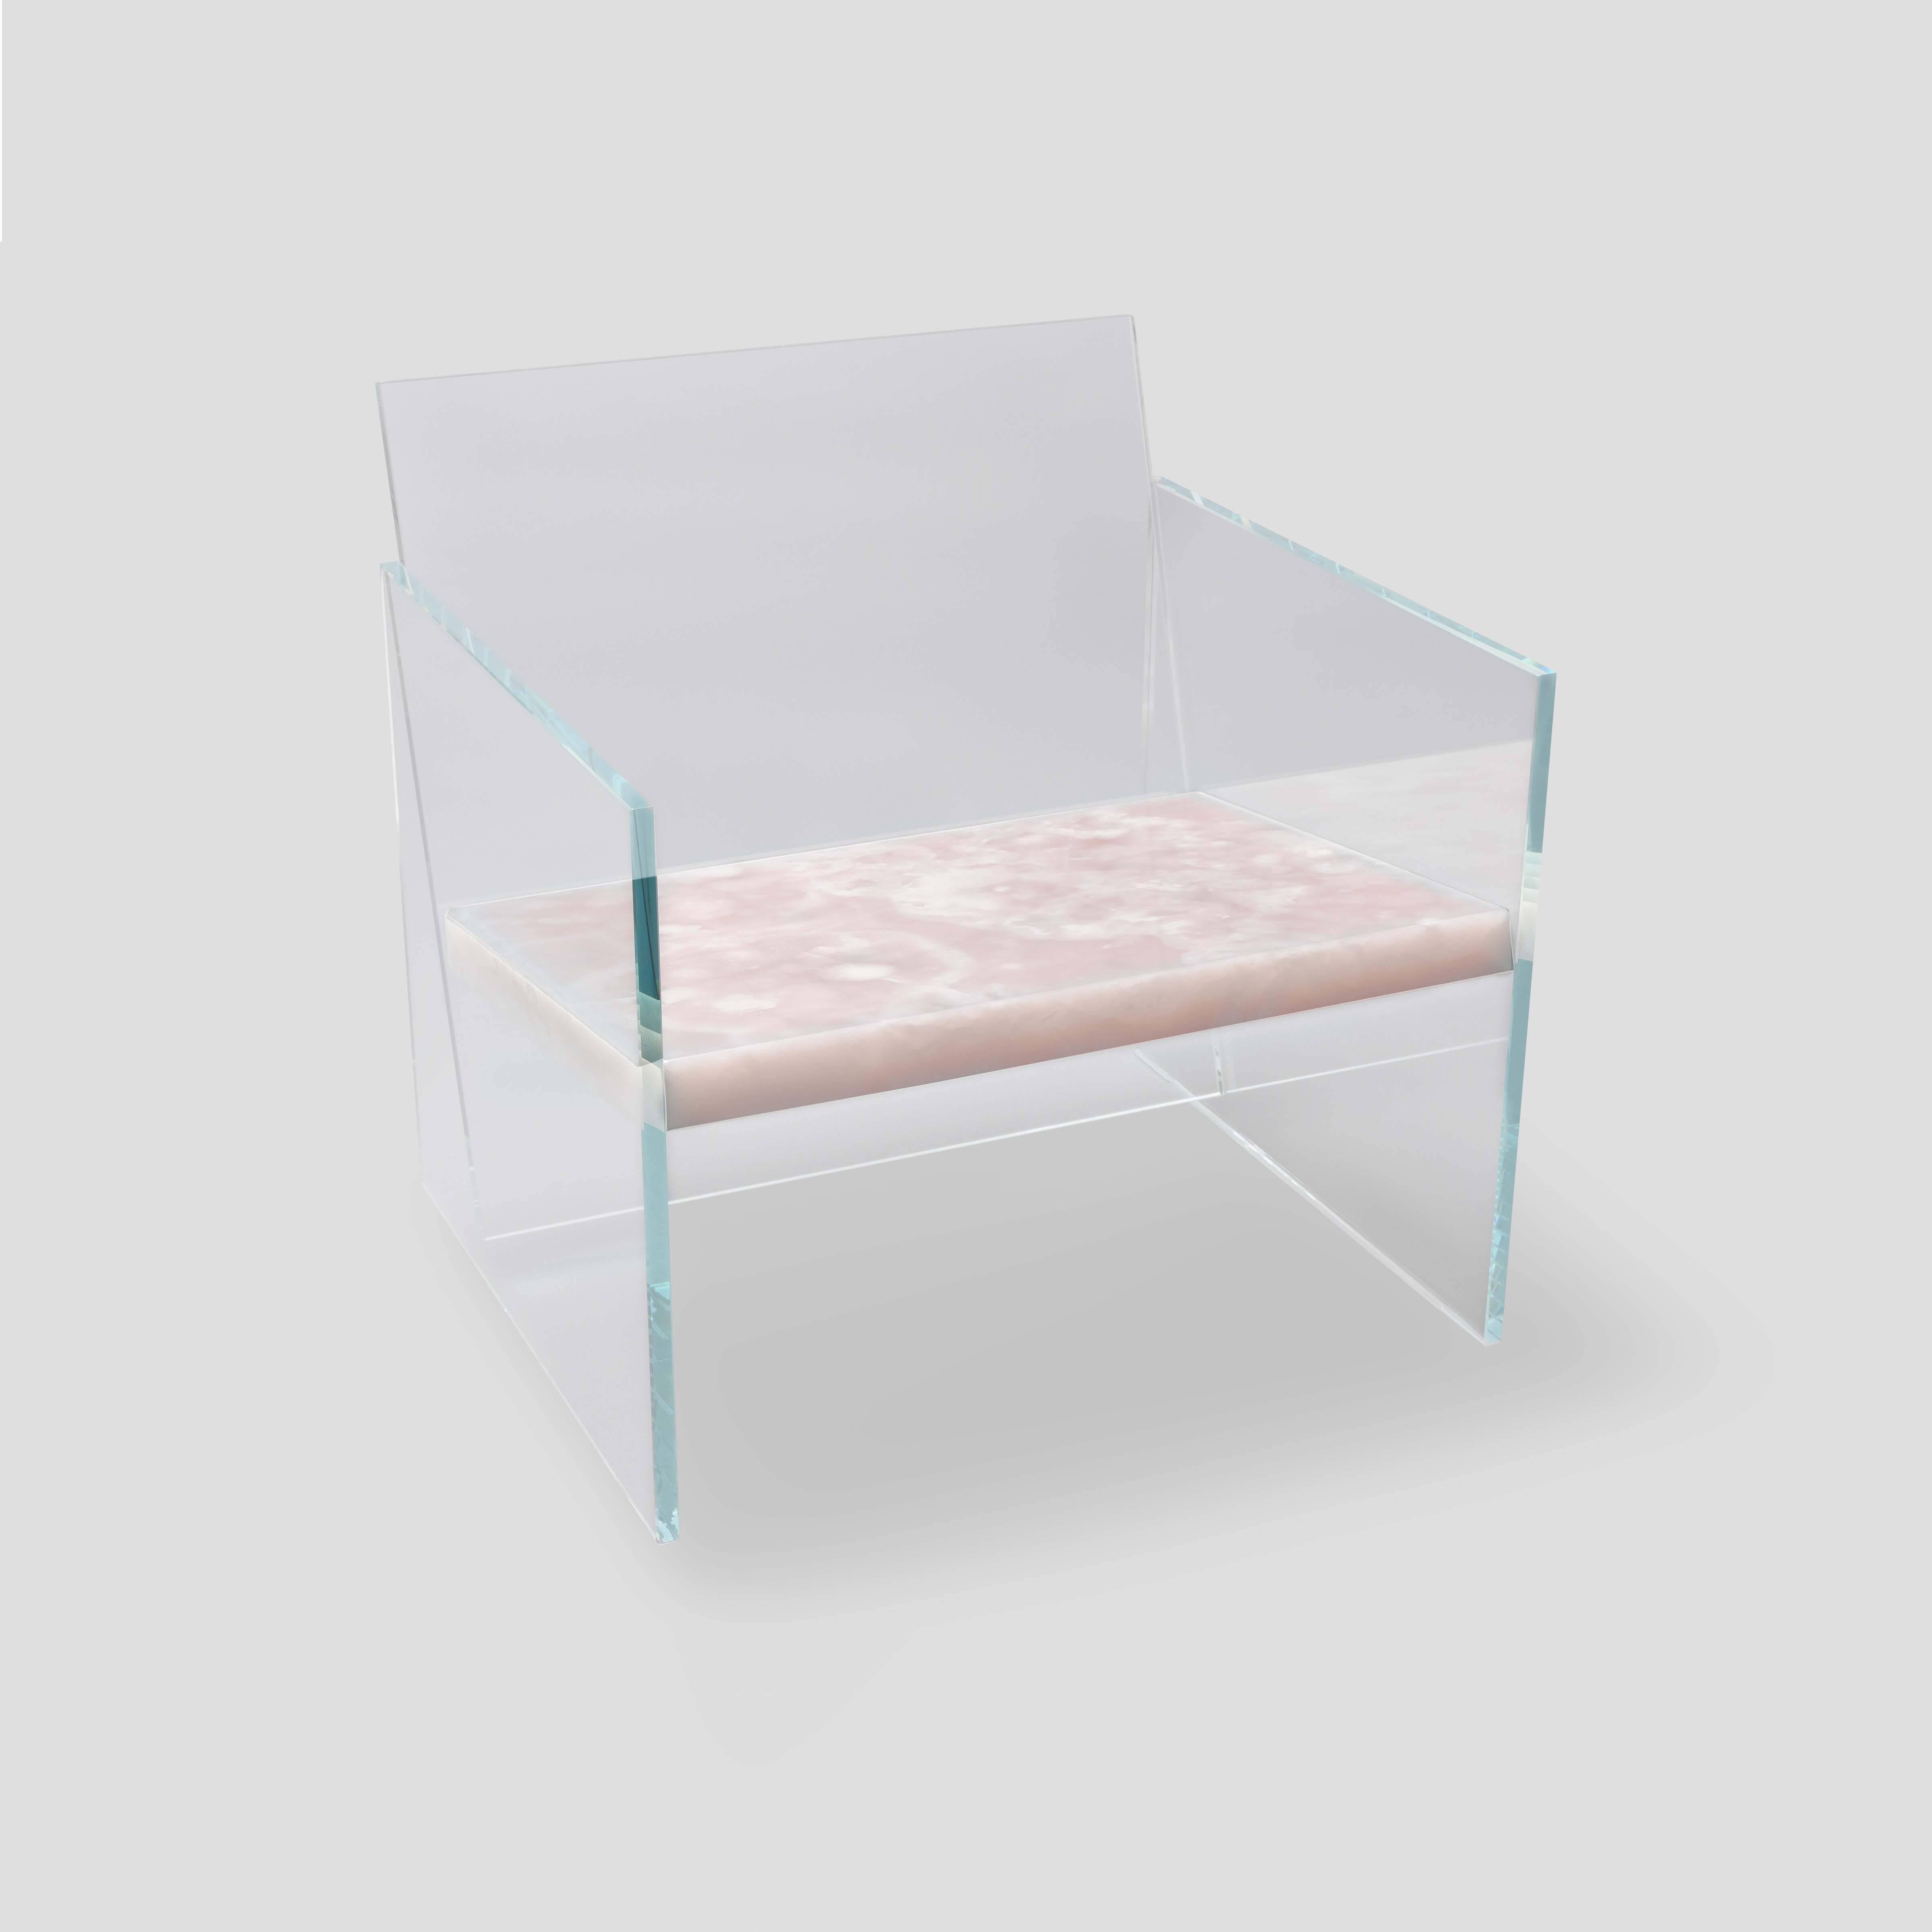 Characterized by its material and form, this lounge chair is made of ultra-clear glass and rose onyx; it is one of seven works from the Tension collection. Claste drew inspiration from the juxtaposition of stability and fragility to create this